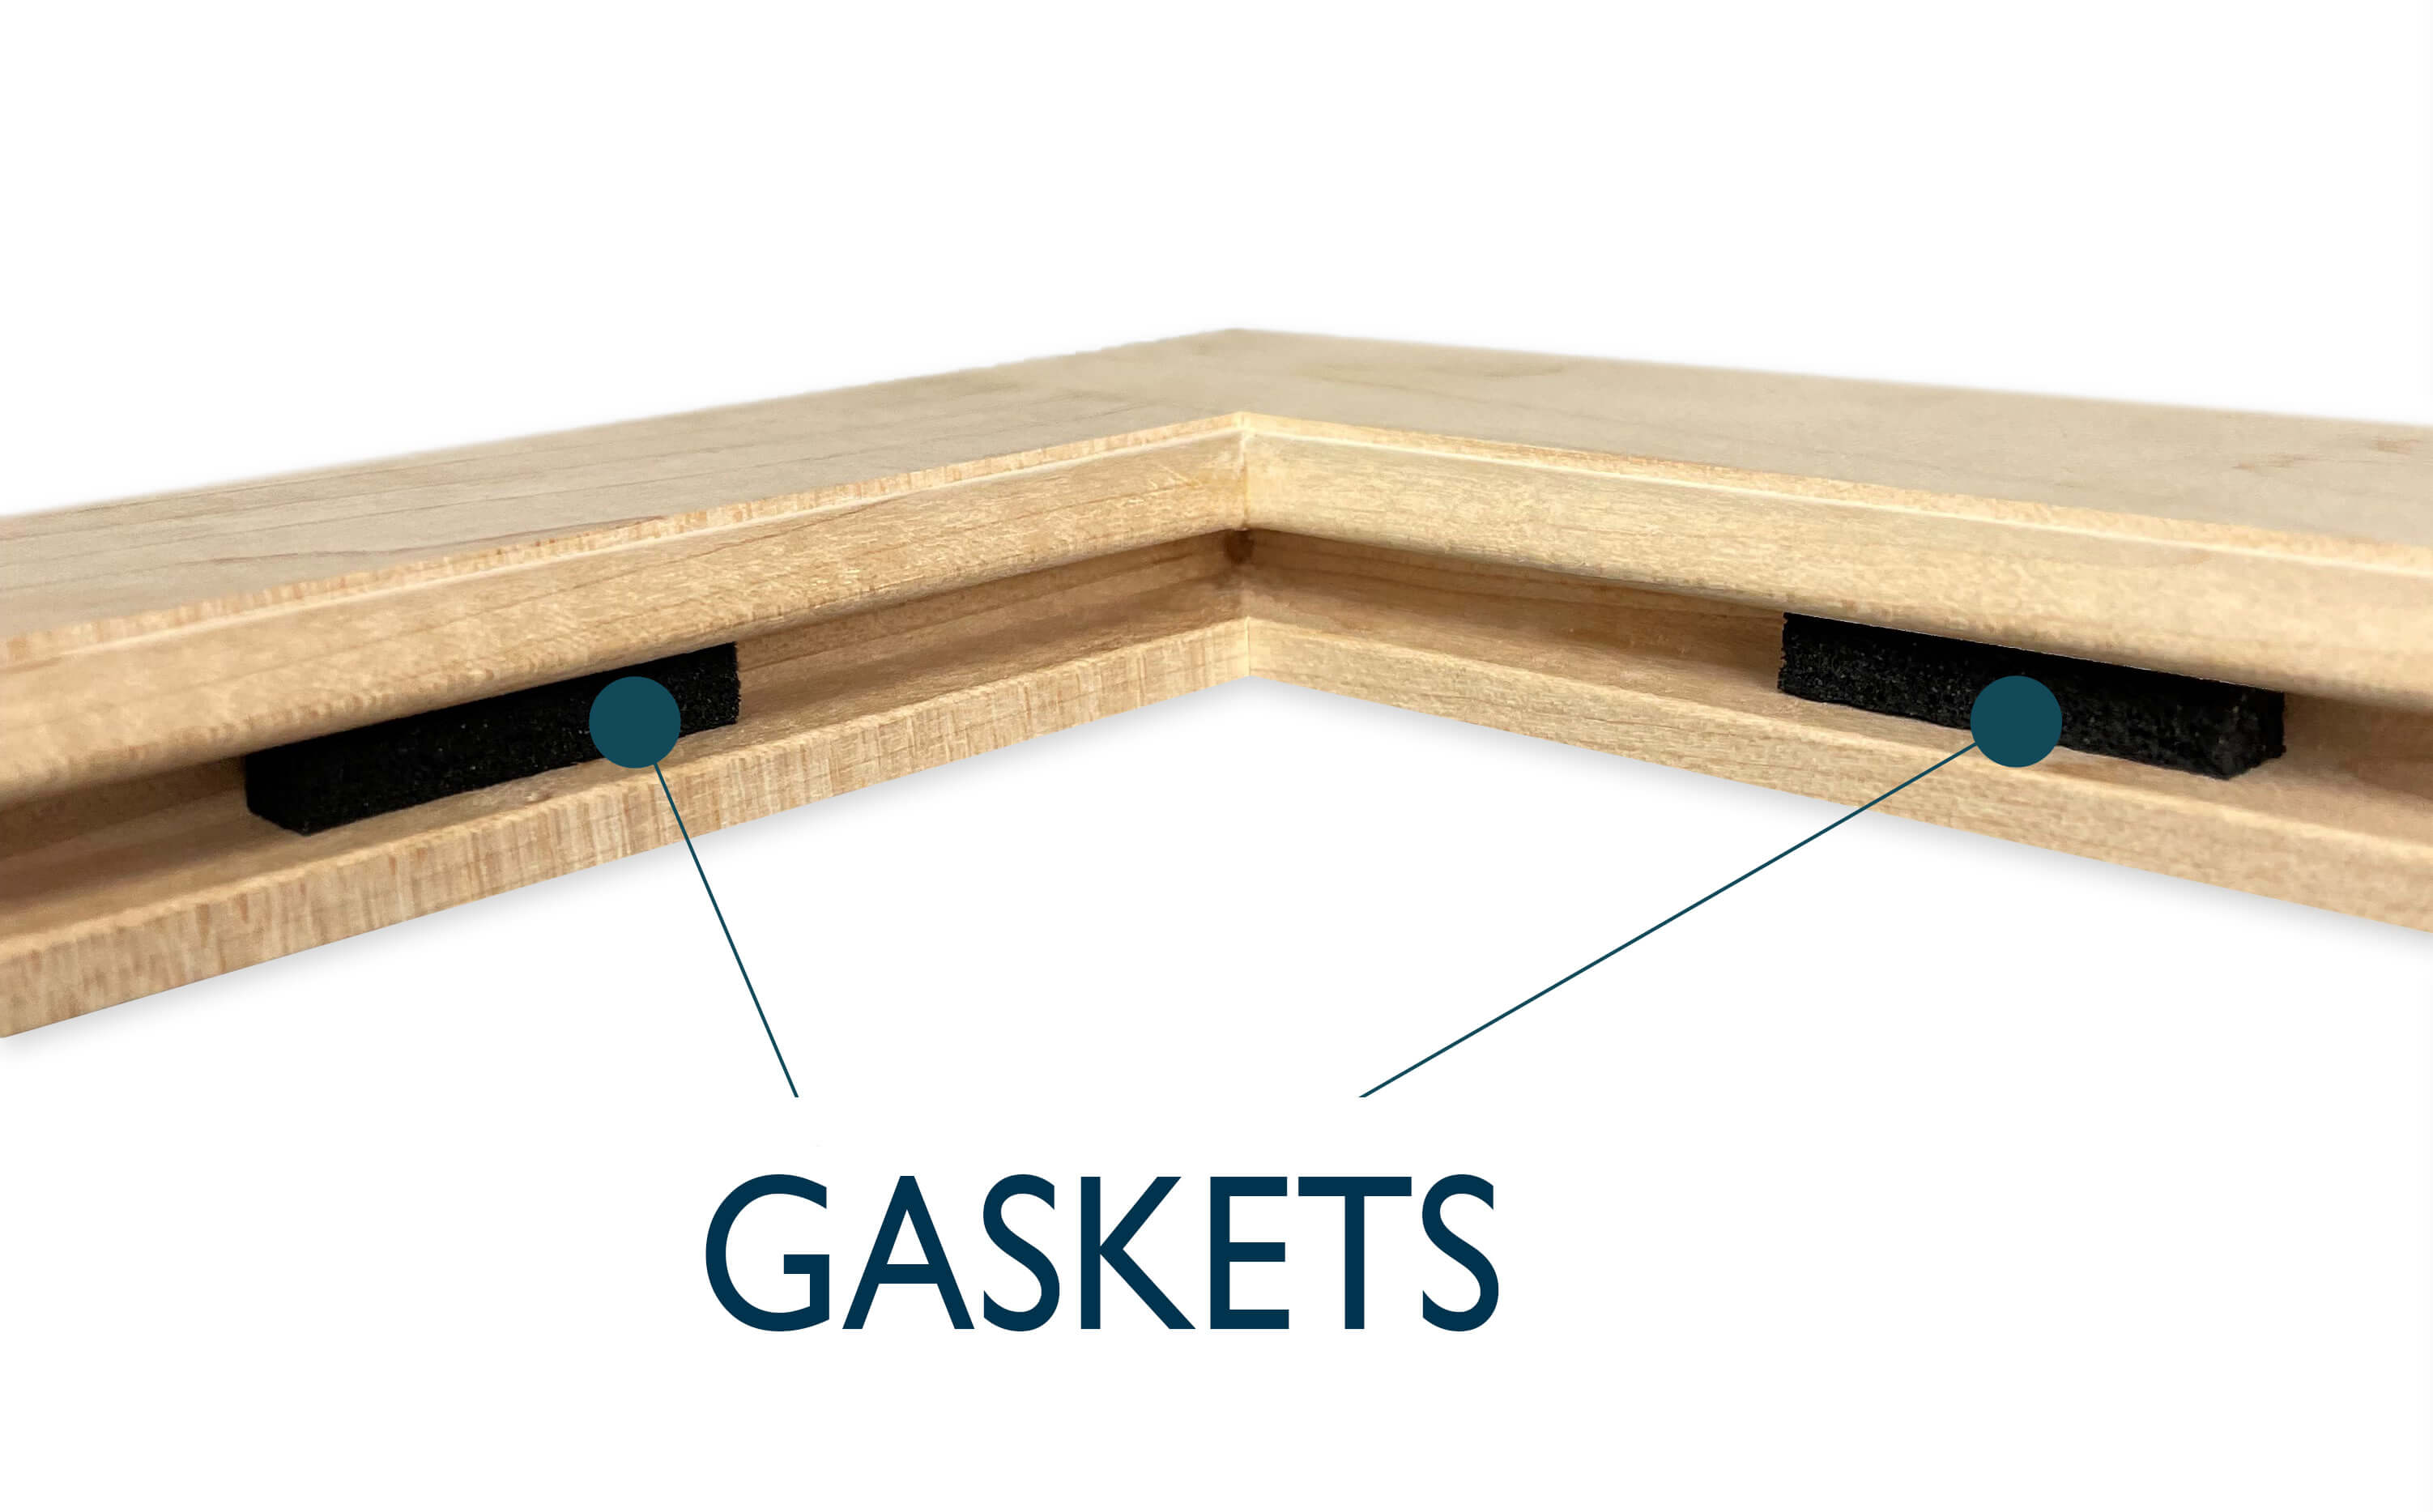 A close-up of gaskets used for kitchen cabinetry construction.